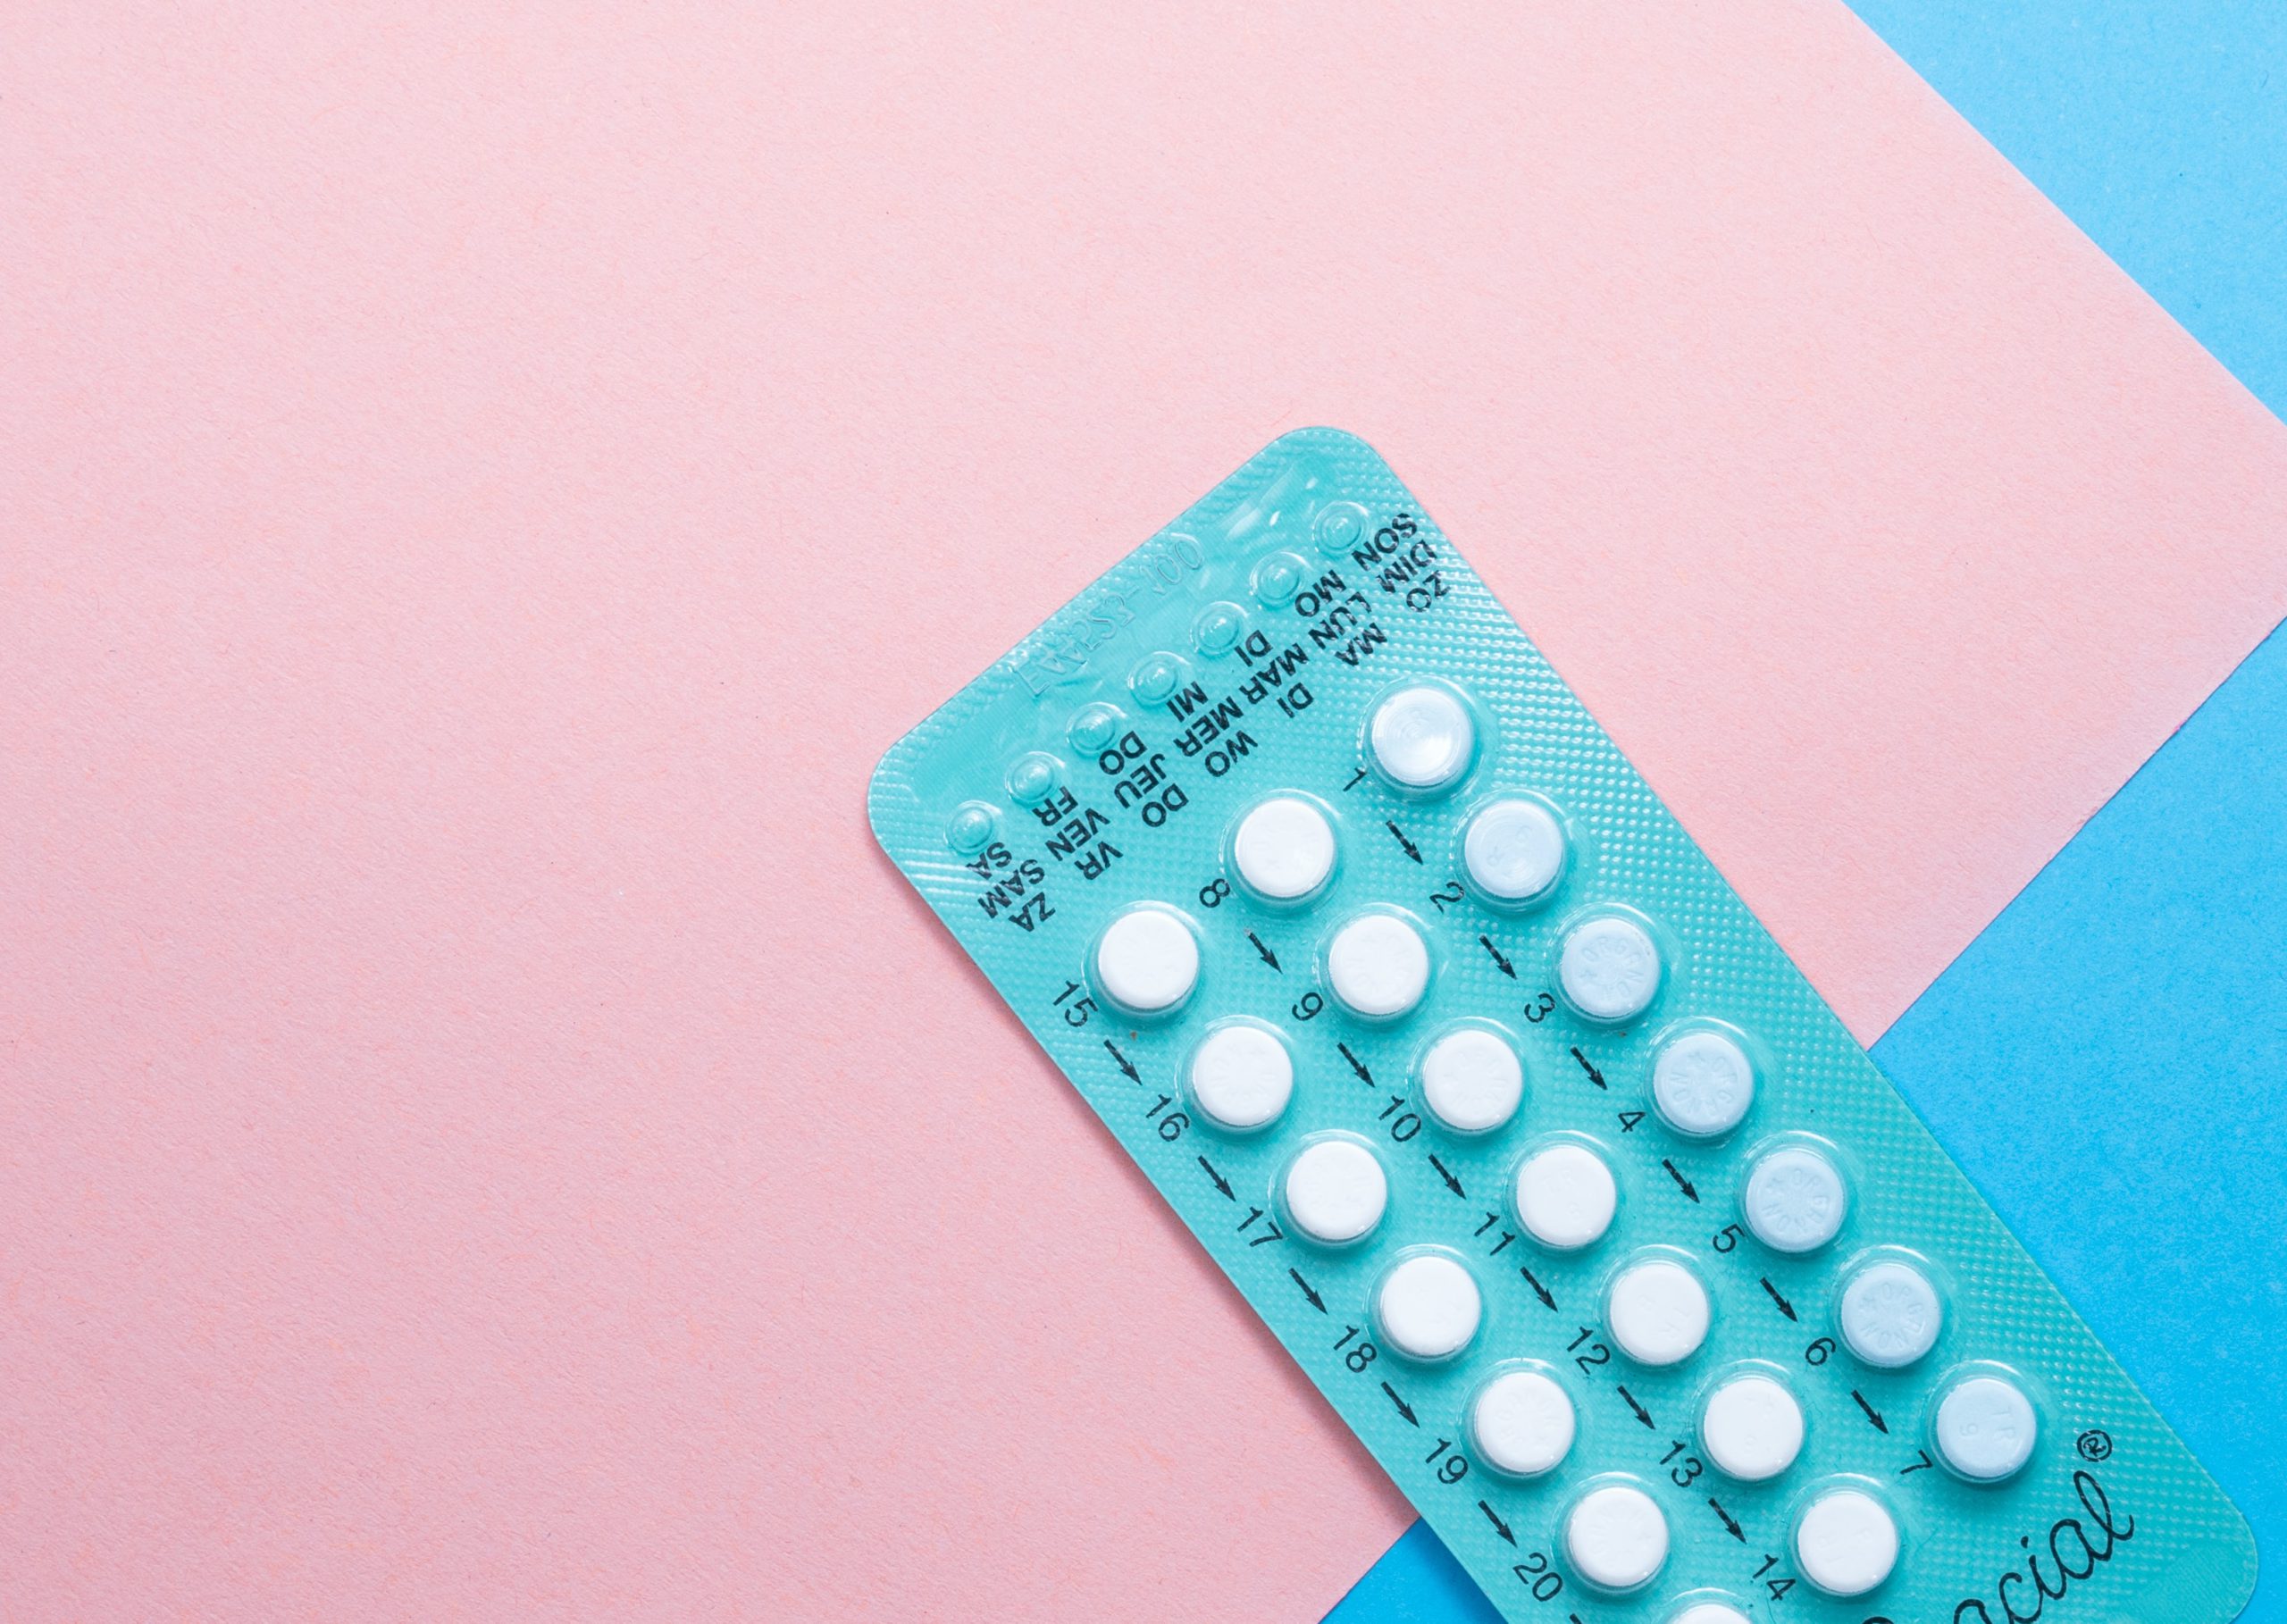 RHE Successful in Obtaining Certification of Class Action Relating to Defective Alesse Birth Control